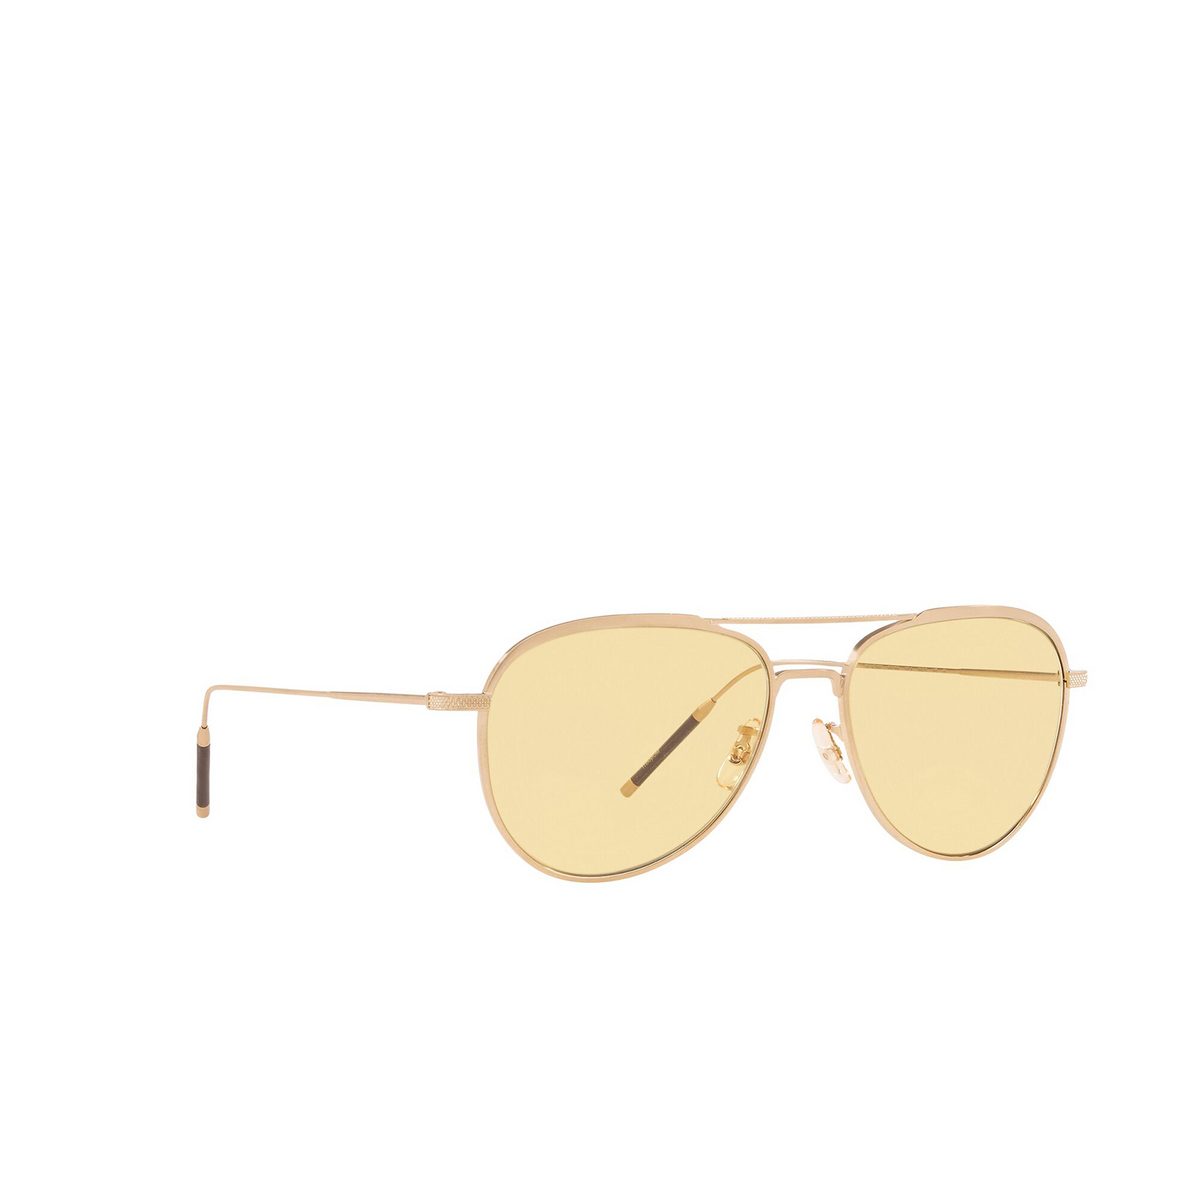 Oliver Peoples® Aviator Sunglasses: Tk-3 OV1276ST color Brushed Gold 5311R6 - three-quarters view.